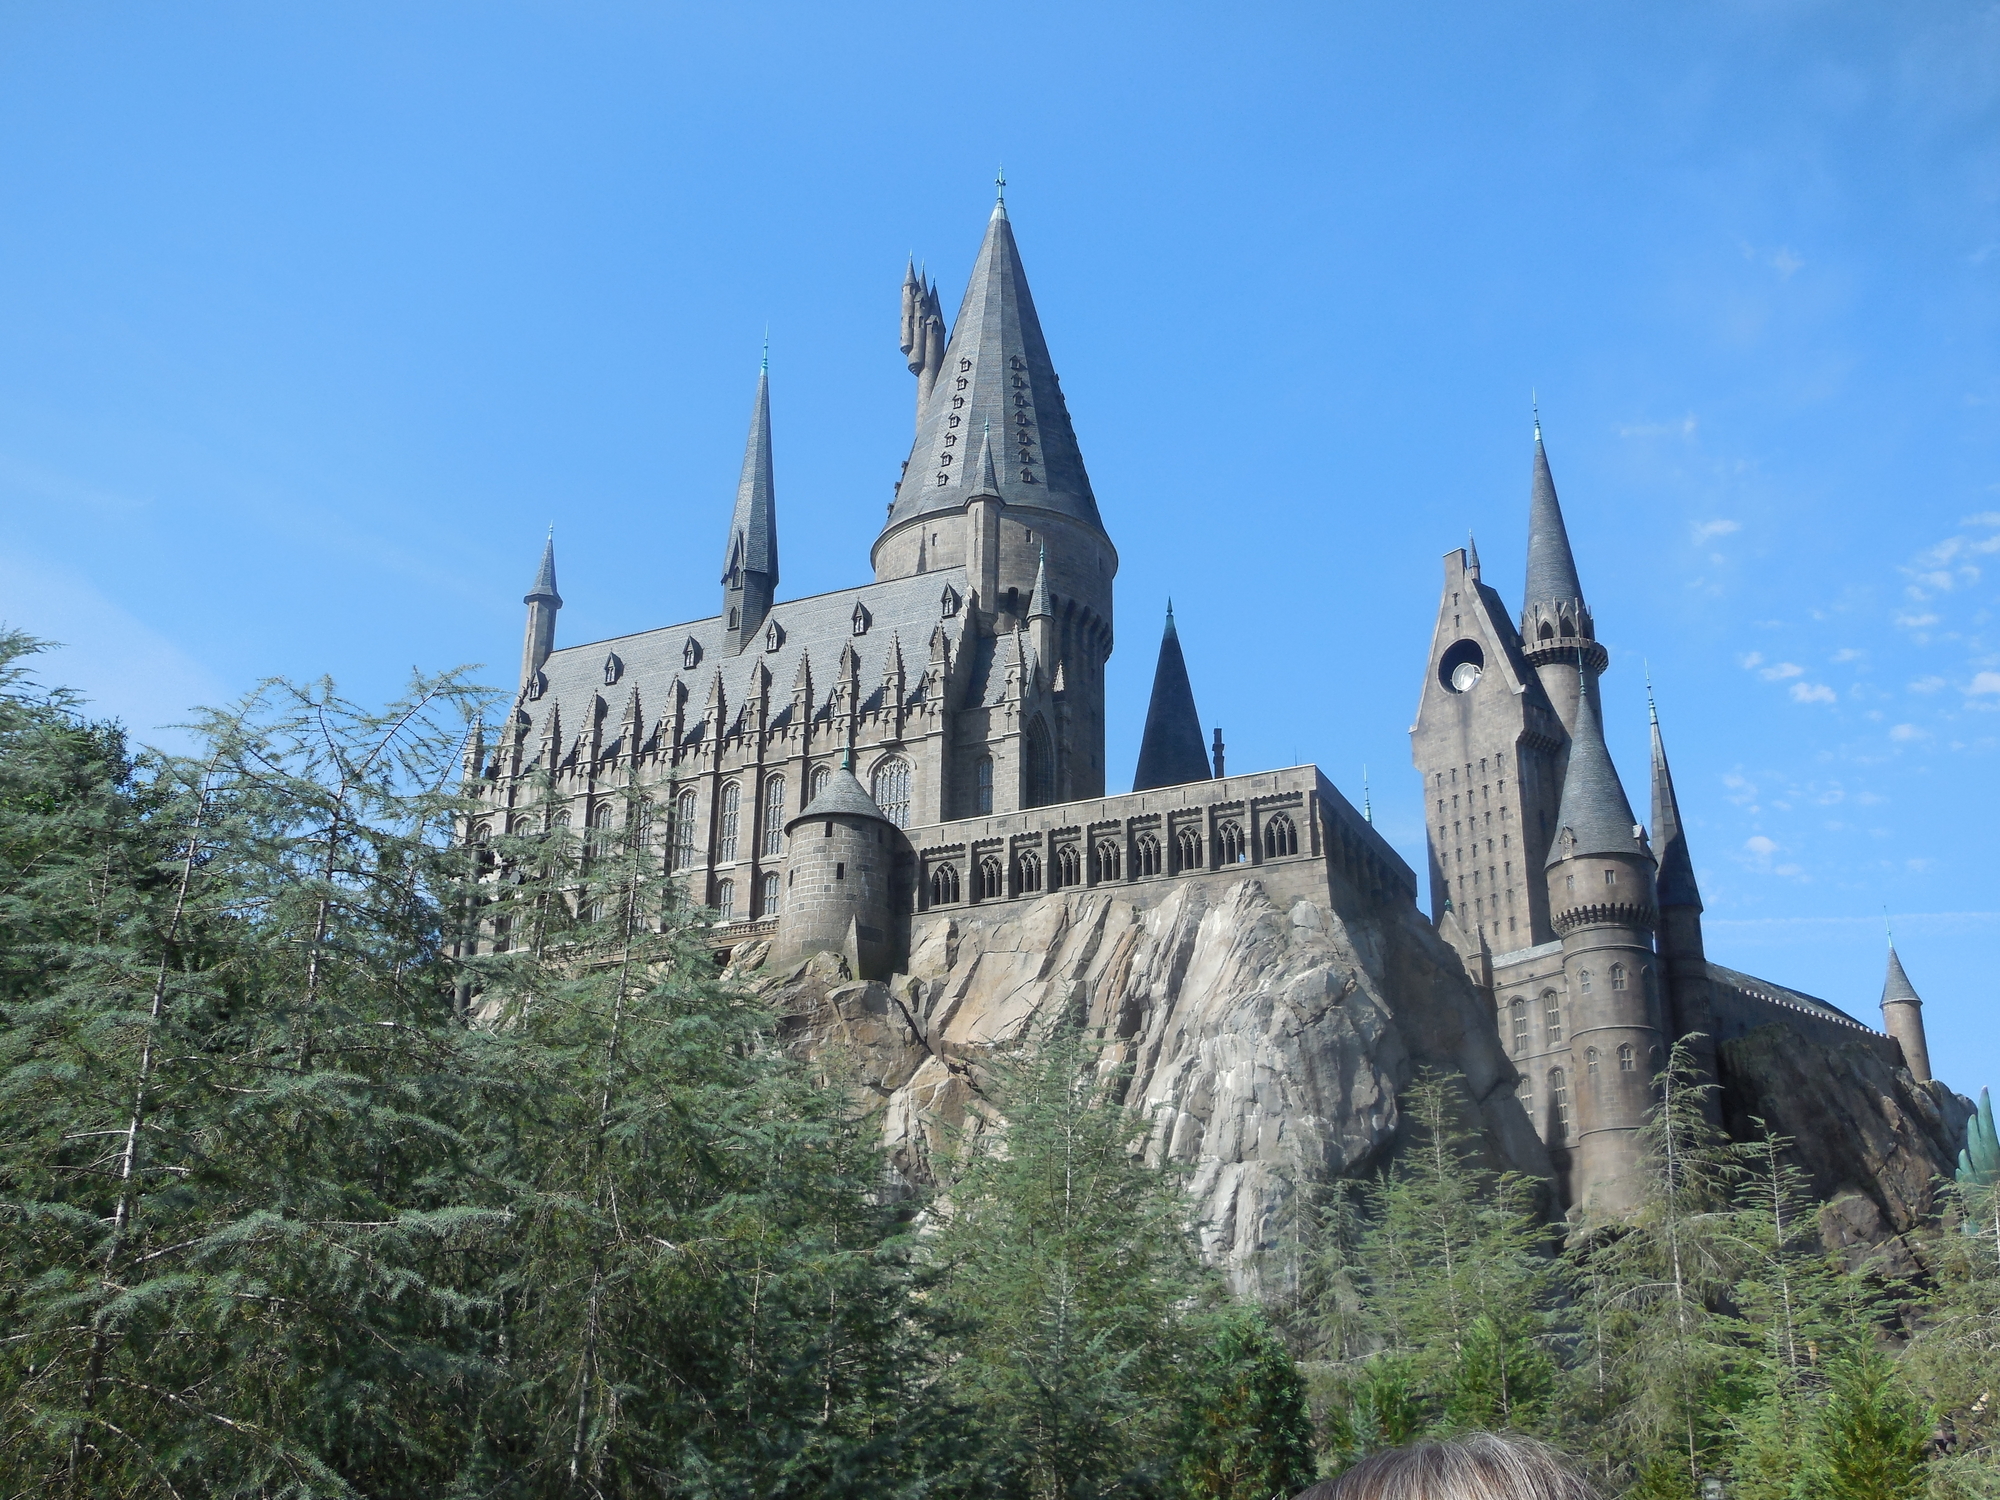 A view of the Hogwarts building at Universal Studios.